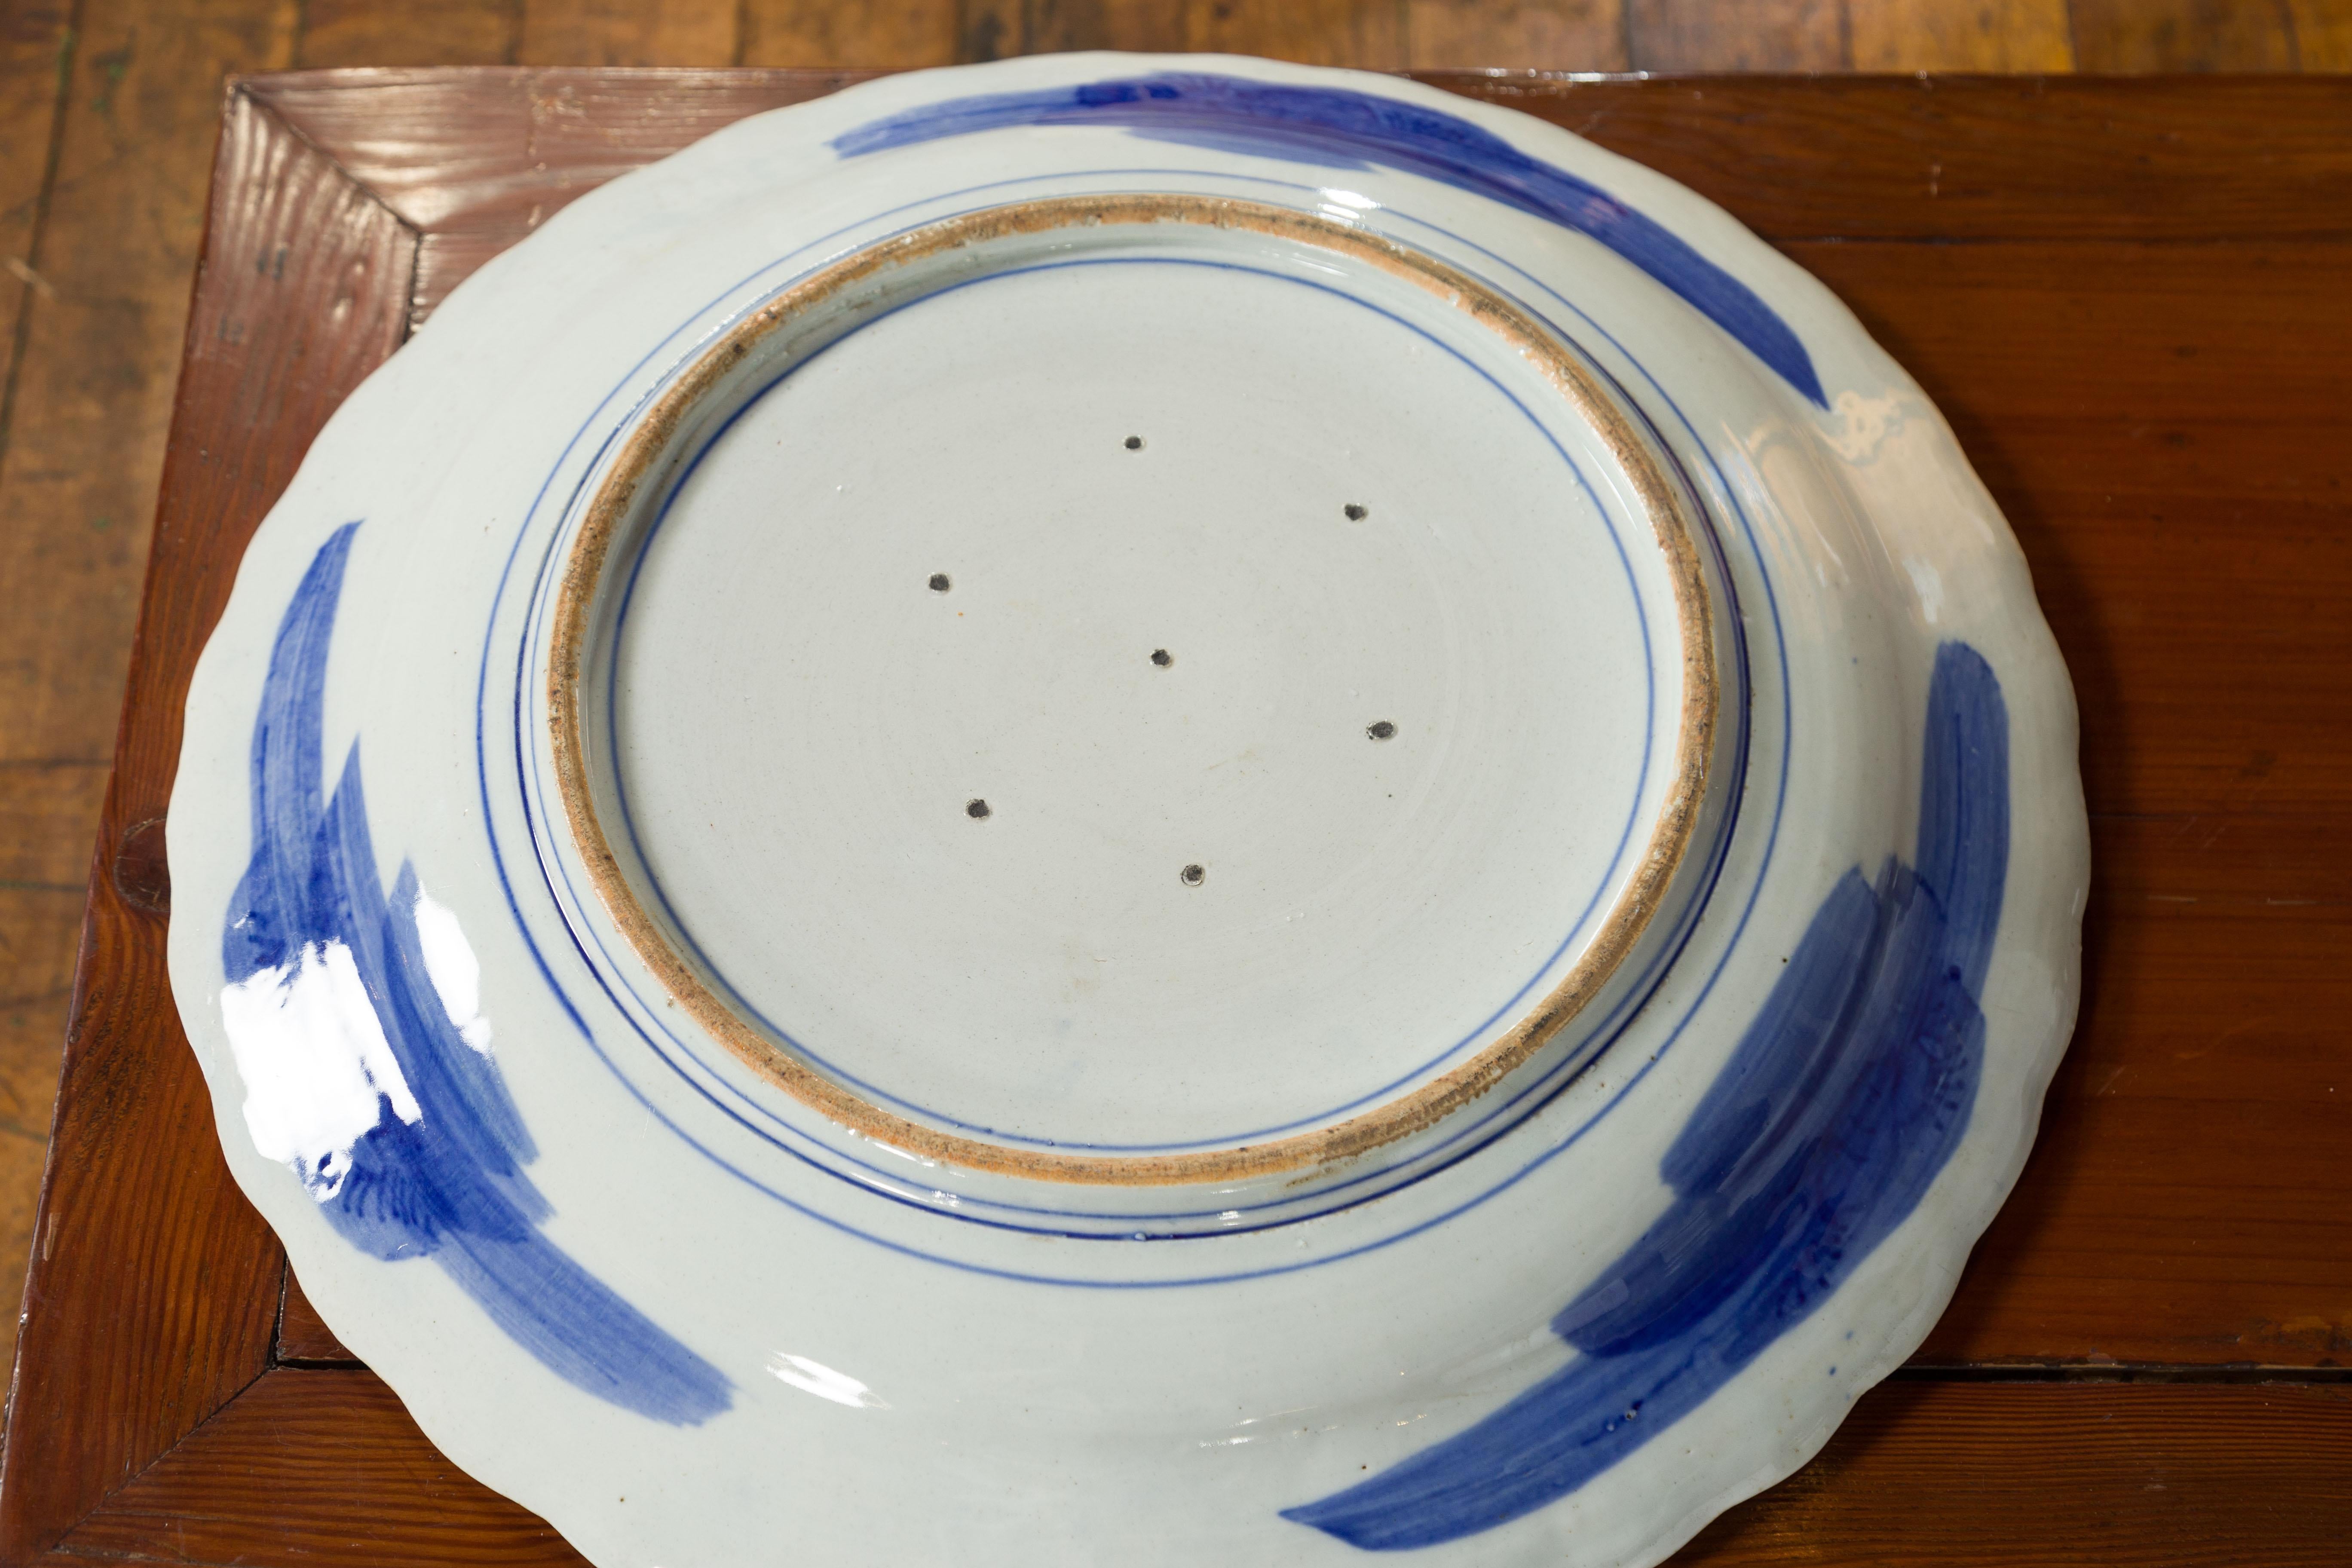 Japanese Hand-Painted Blue and White Porcelain Charger Plate with Foliage Décor For Sale 13